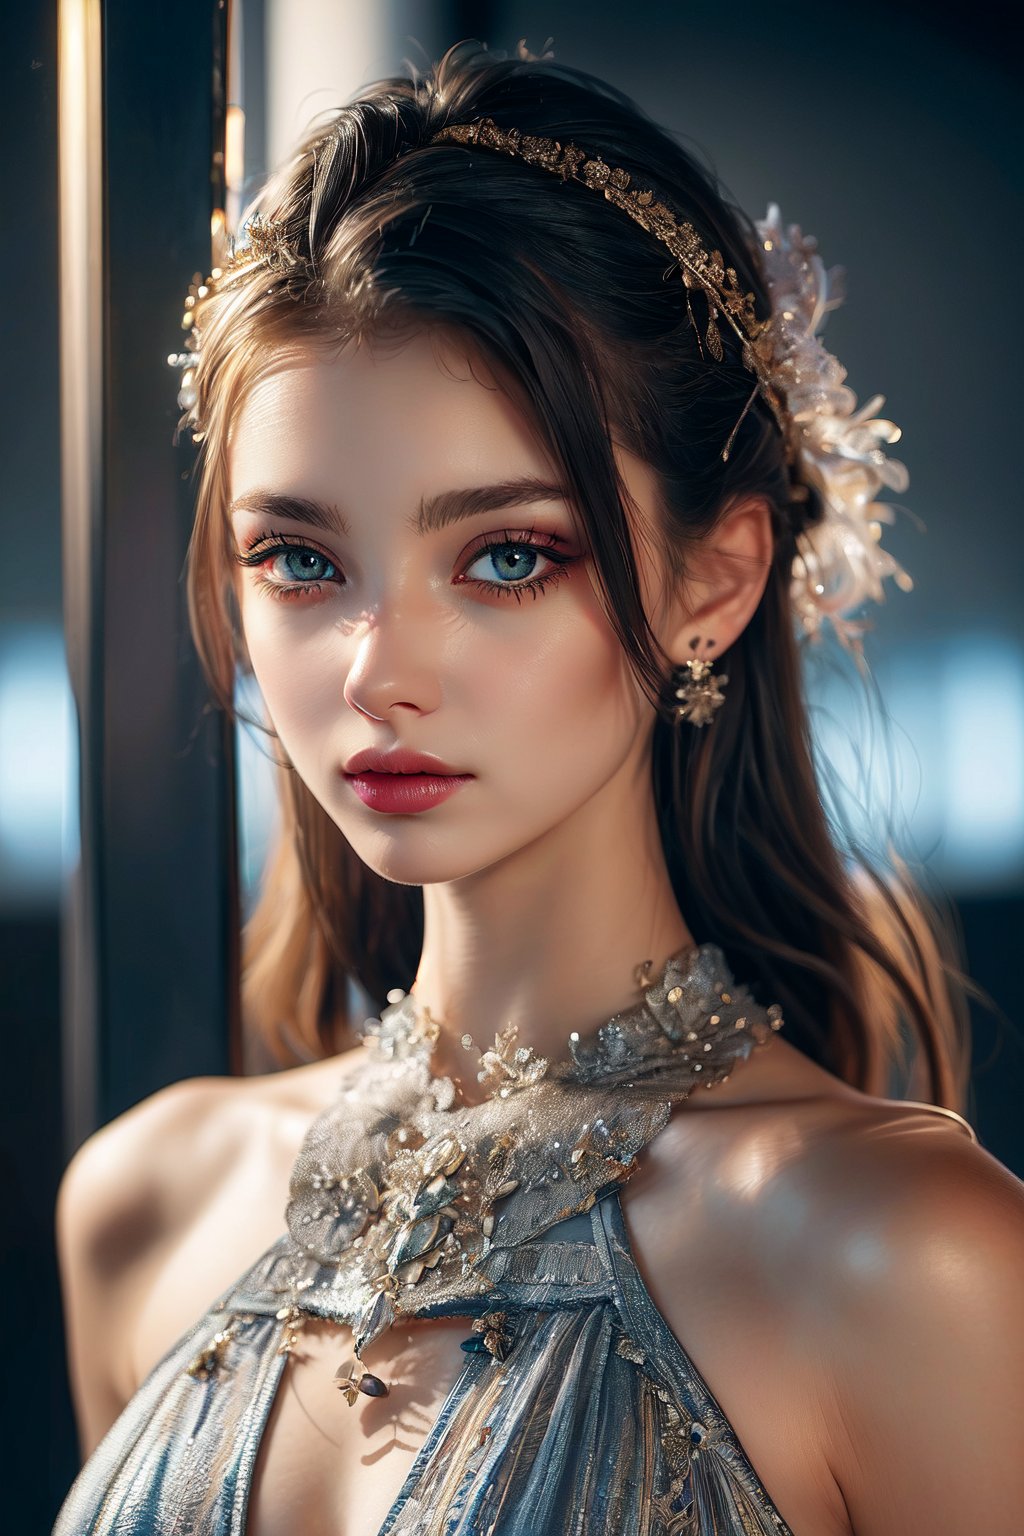 (masterpiece, high quality:1.5), 8K, HDR, 
1girl, well_defined_face, well_defined_eyes, ultra_detailed_eyes, ultra_detailed_face, by FuturEvoLab, 
ethereal lighting, immortal, elegant, porcelain skin, jet-black hair, waves, pale face, ice-blue eyes, blood-red lips, pinhole photograph, retro aesthetic, monochromatic backdrop, mysterious, enigmatic, timeless allure, the siren of the night, secrets, longing, hidden dangers, captivating, nostalgia, timeless fascination, Edge feathering and holy light, Exquisite face, Exquisite face, Exquisite face,Exquisite face